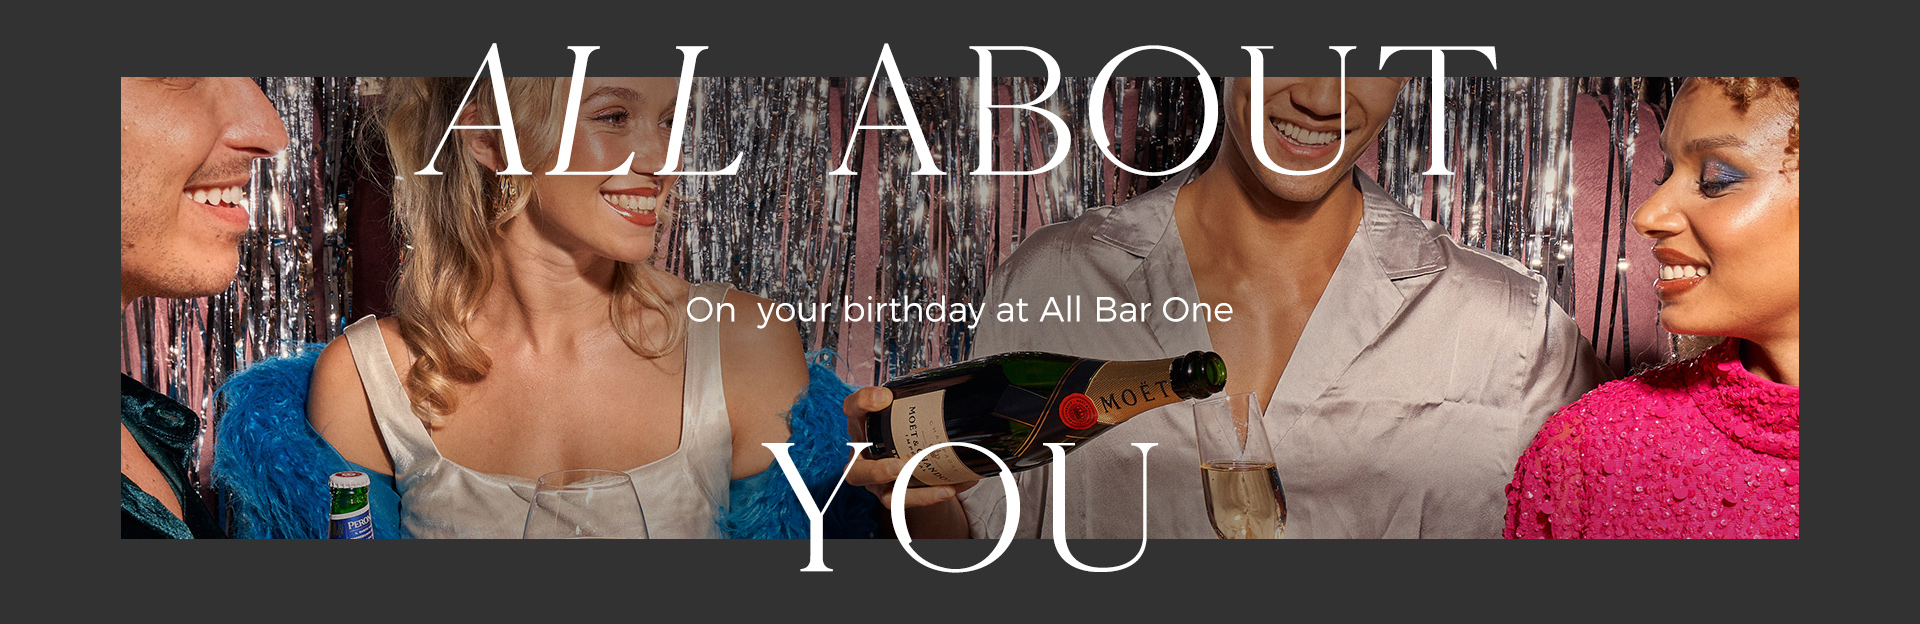 Birthday parties at All Bar One